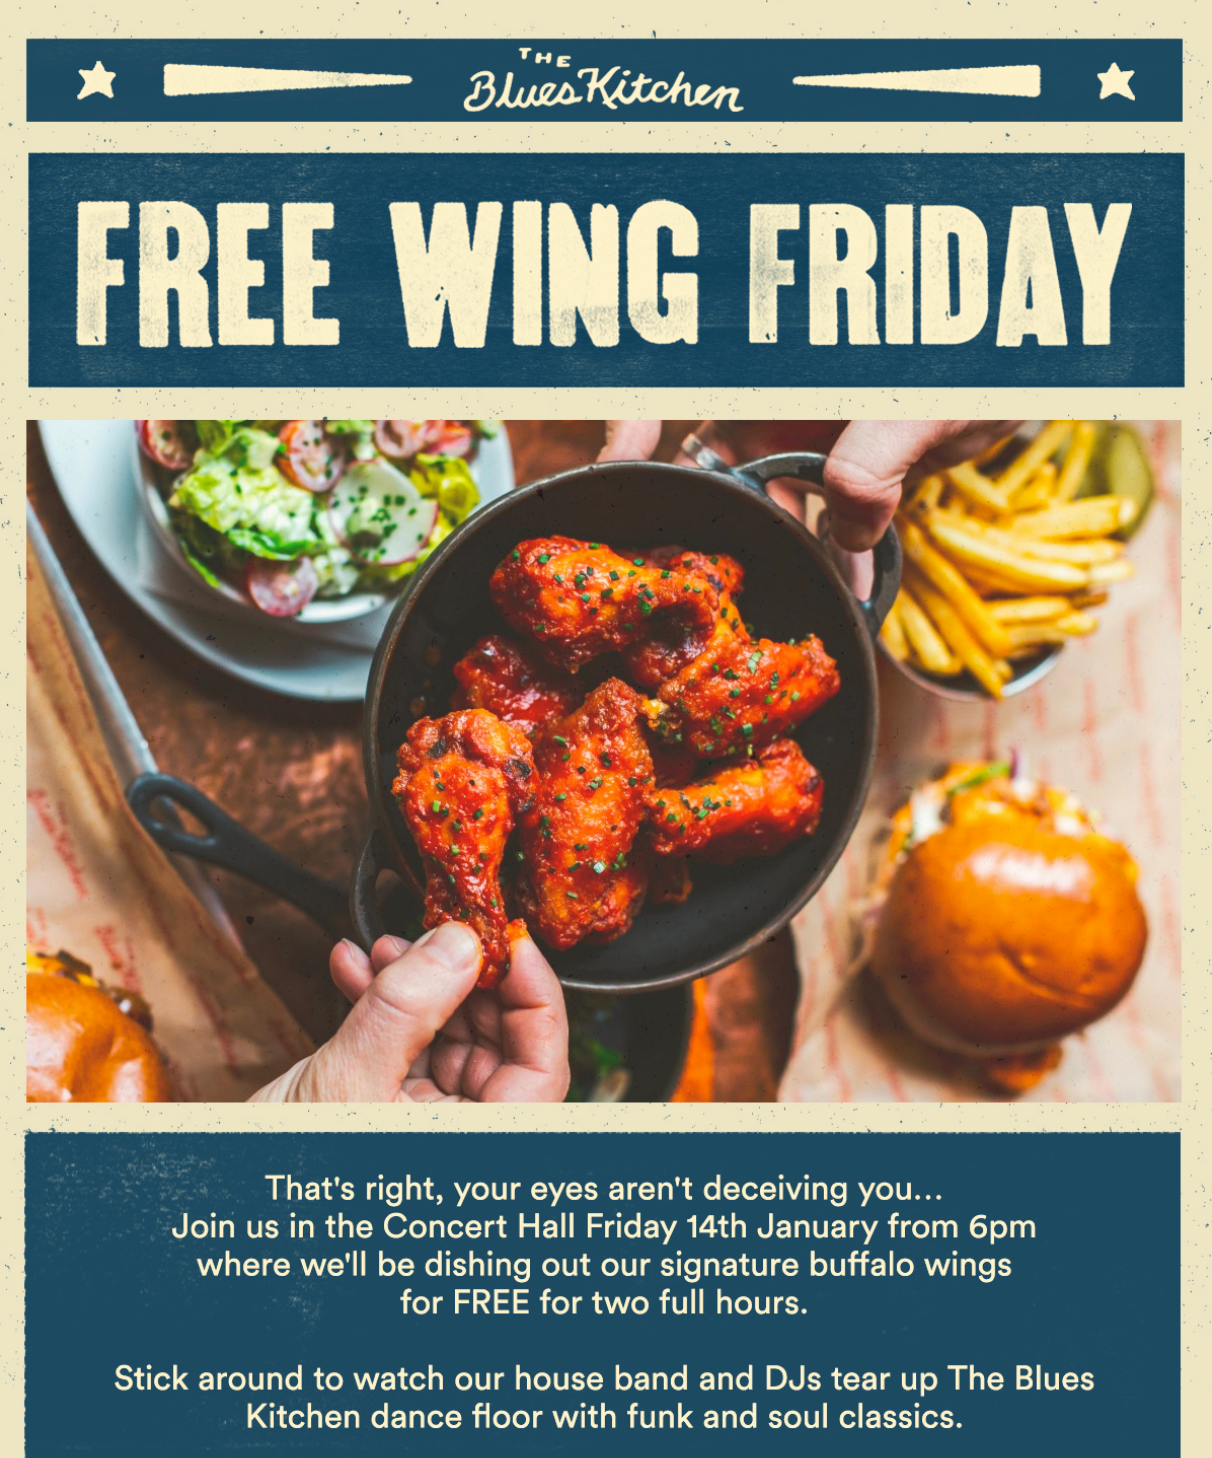 You can get chicken wings for free at this Manchester bar on Friday, The Manc